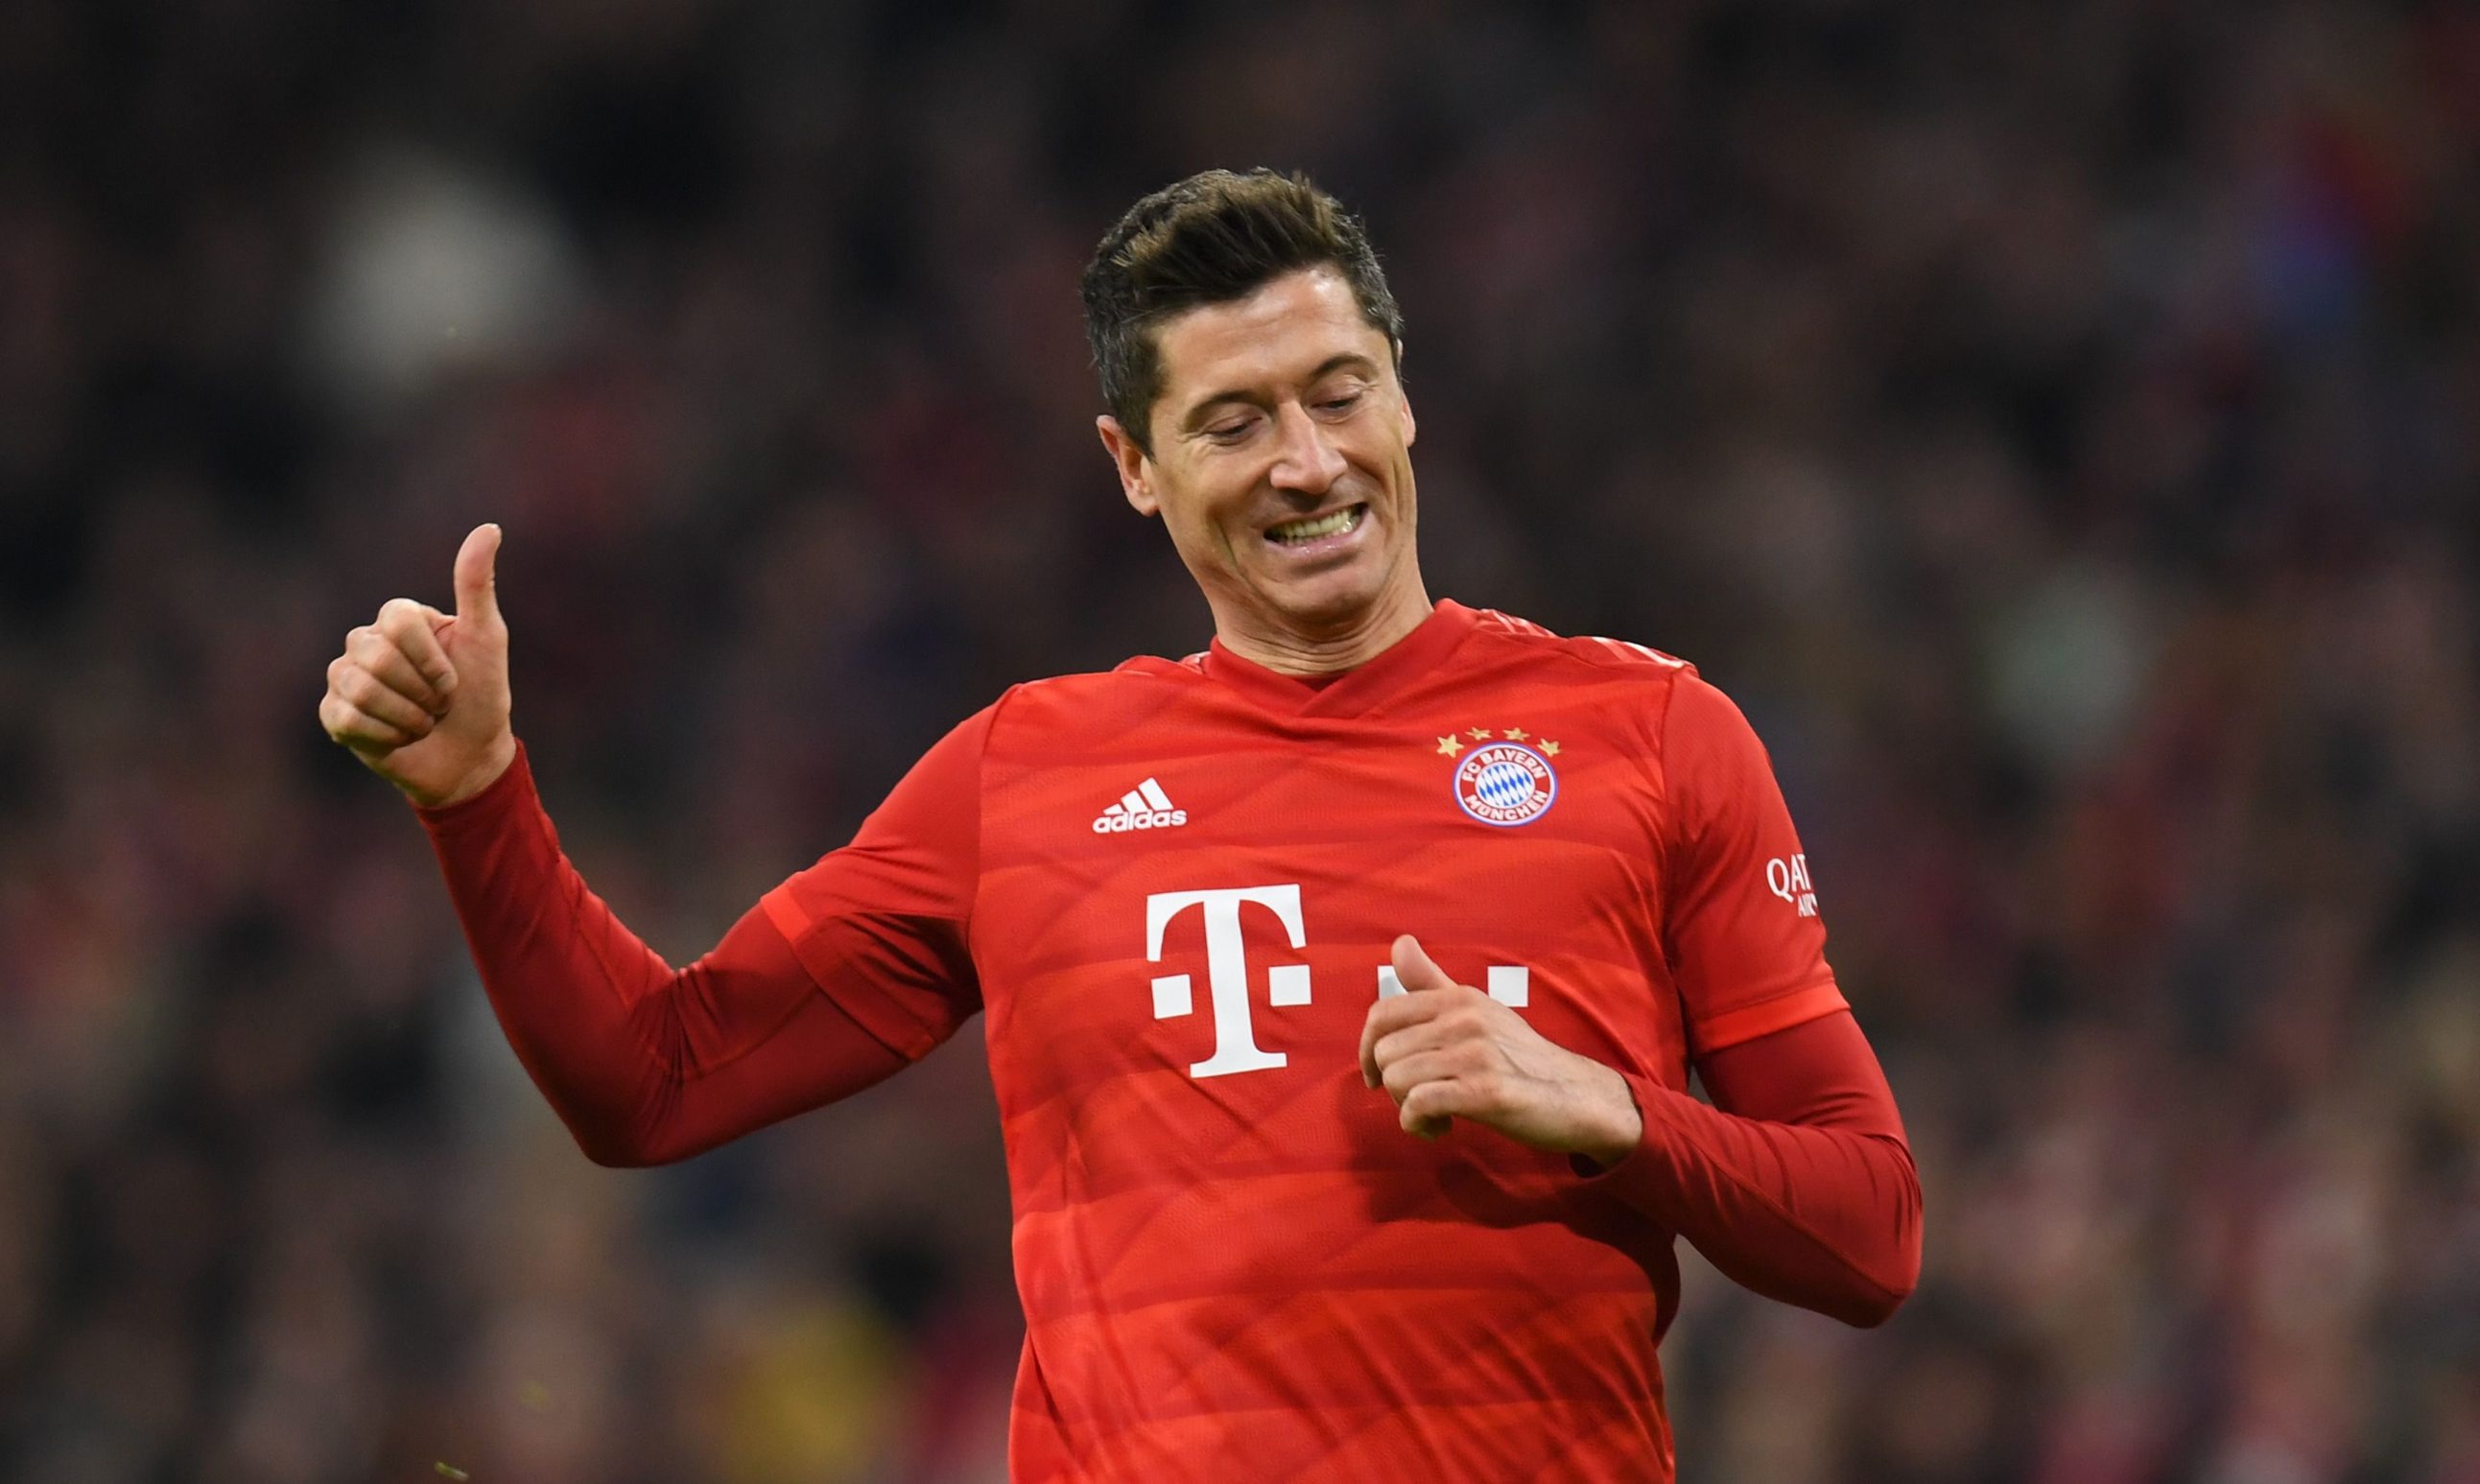 Bayern Munich's Polish forward Robert Lewandowski reacts during the German first division Bundesliga football match FC Bayern Munich v RB Leipzig in Munich, southern Germany, on February 9, 2020. (Photo by Christof STACHE / AFP) / RESTRICTIONS: DFL REGULATIONS PROHIBIT ANY USE OF PHOTOGRAPHS AS IMAGE SEQUENCES AND/OR QUASI-VIDEO